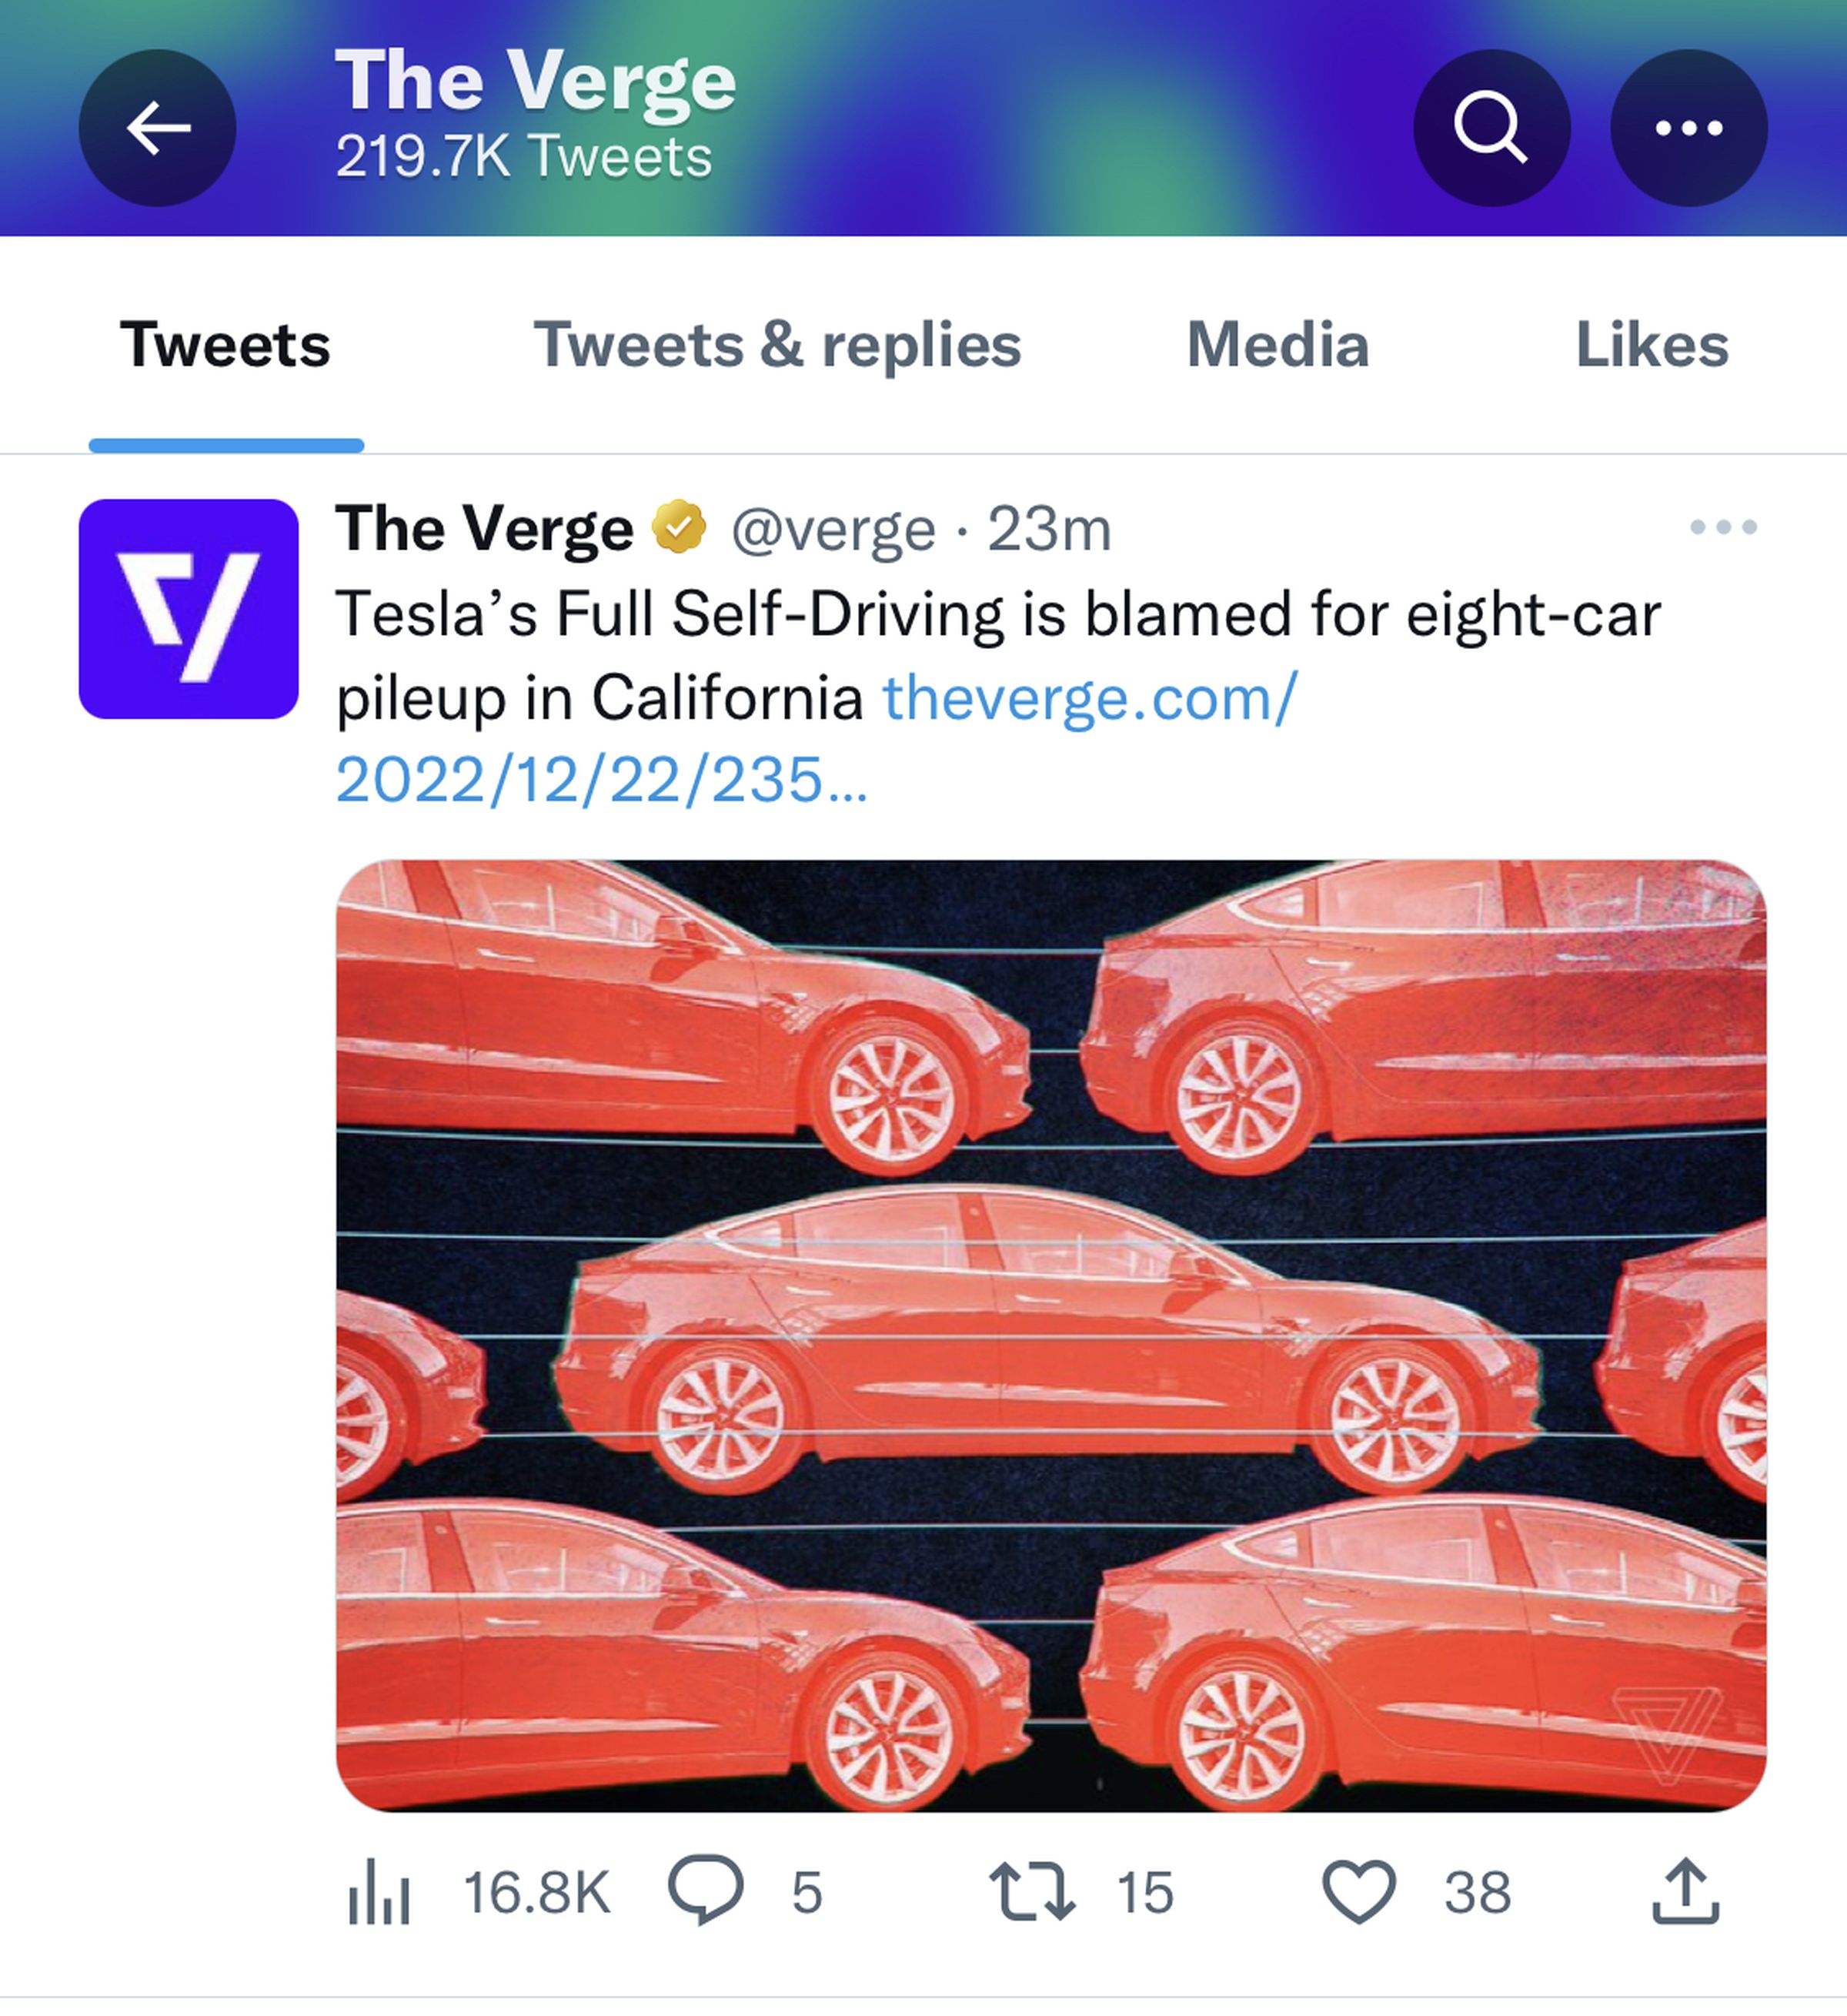 Screenshot of The Verge’s twitter profile, displaying a tweet and the view counter.